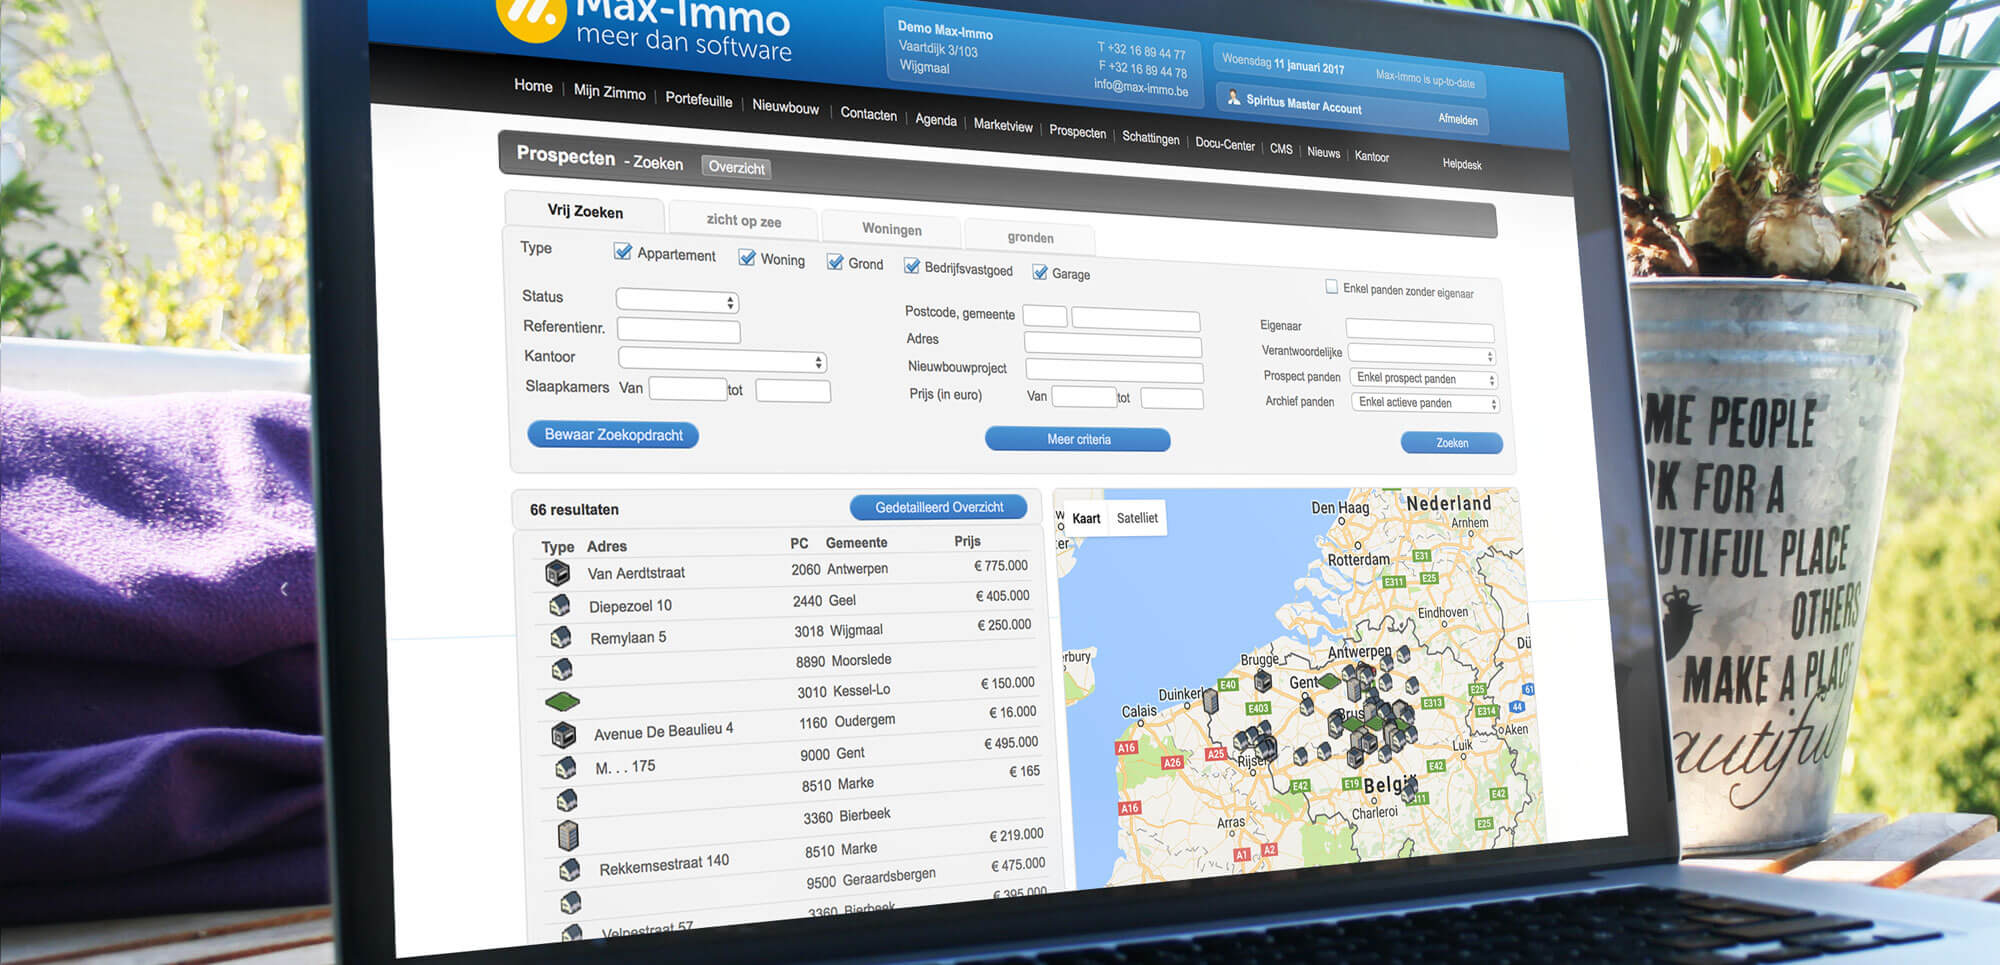 Max-Immo software prospect manager